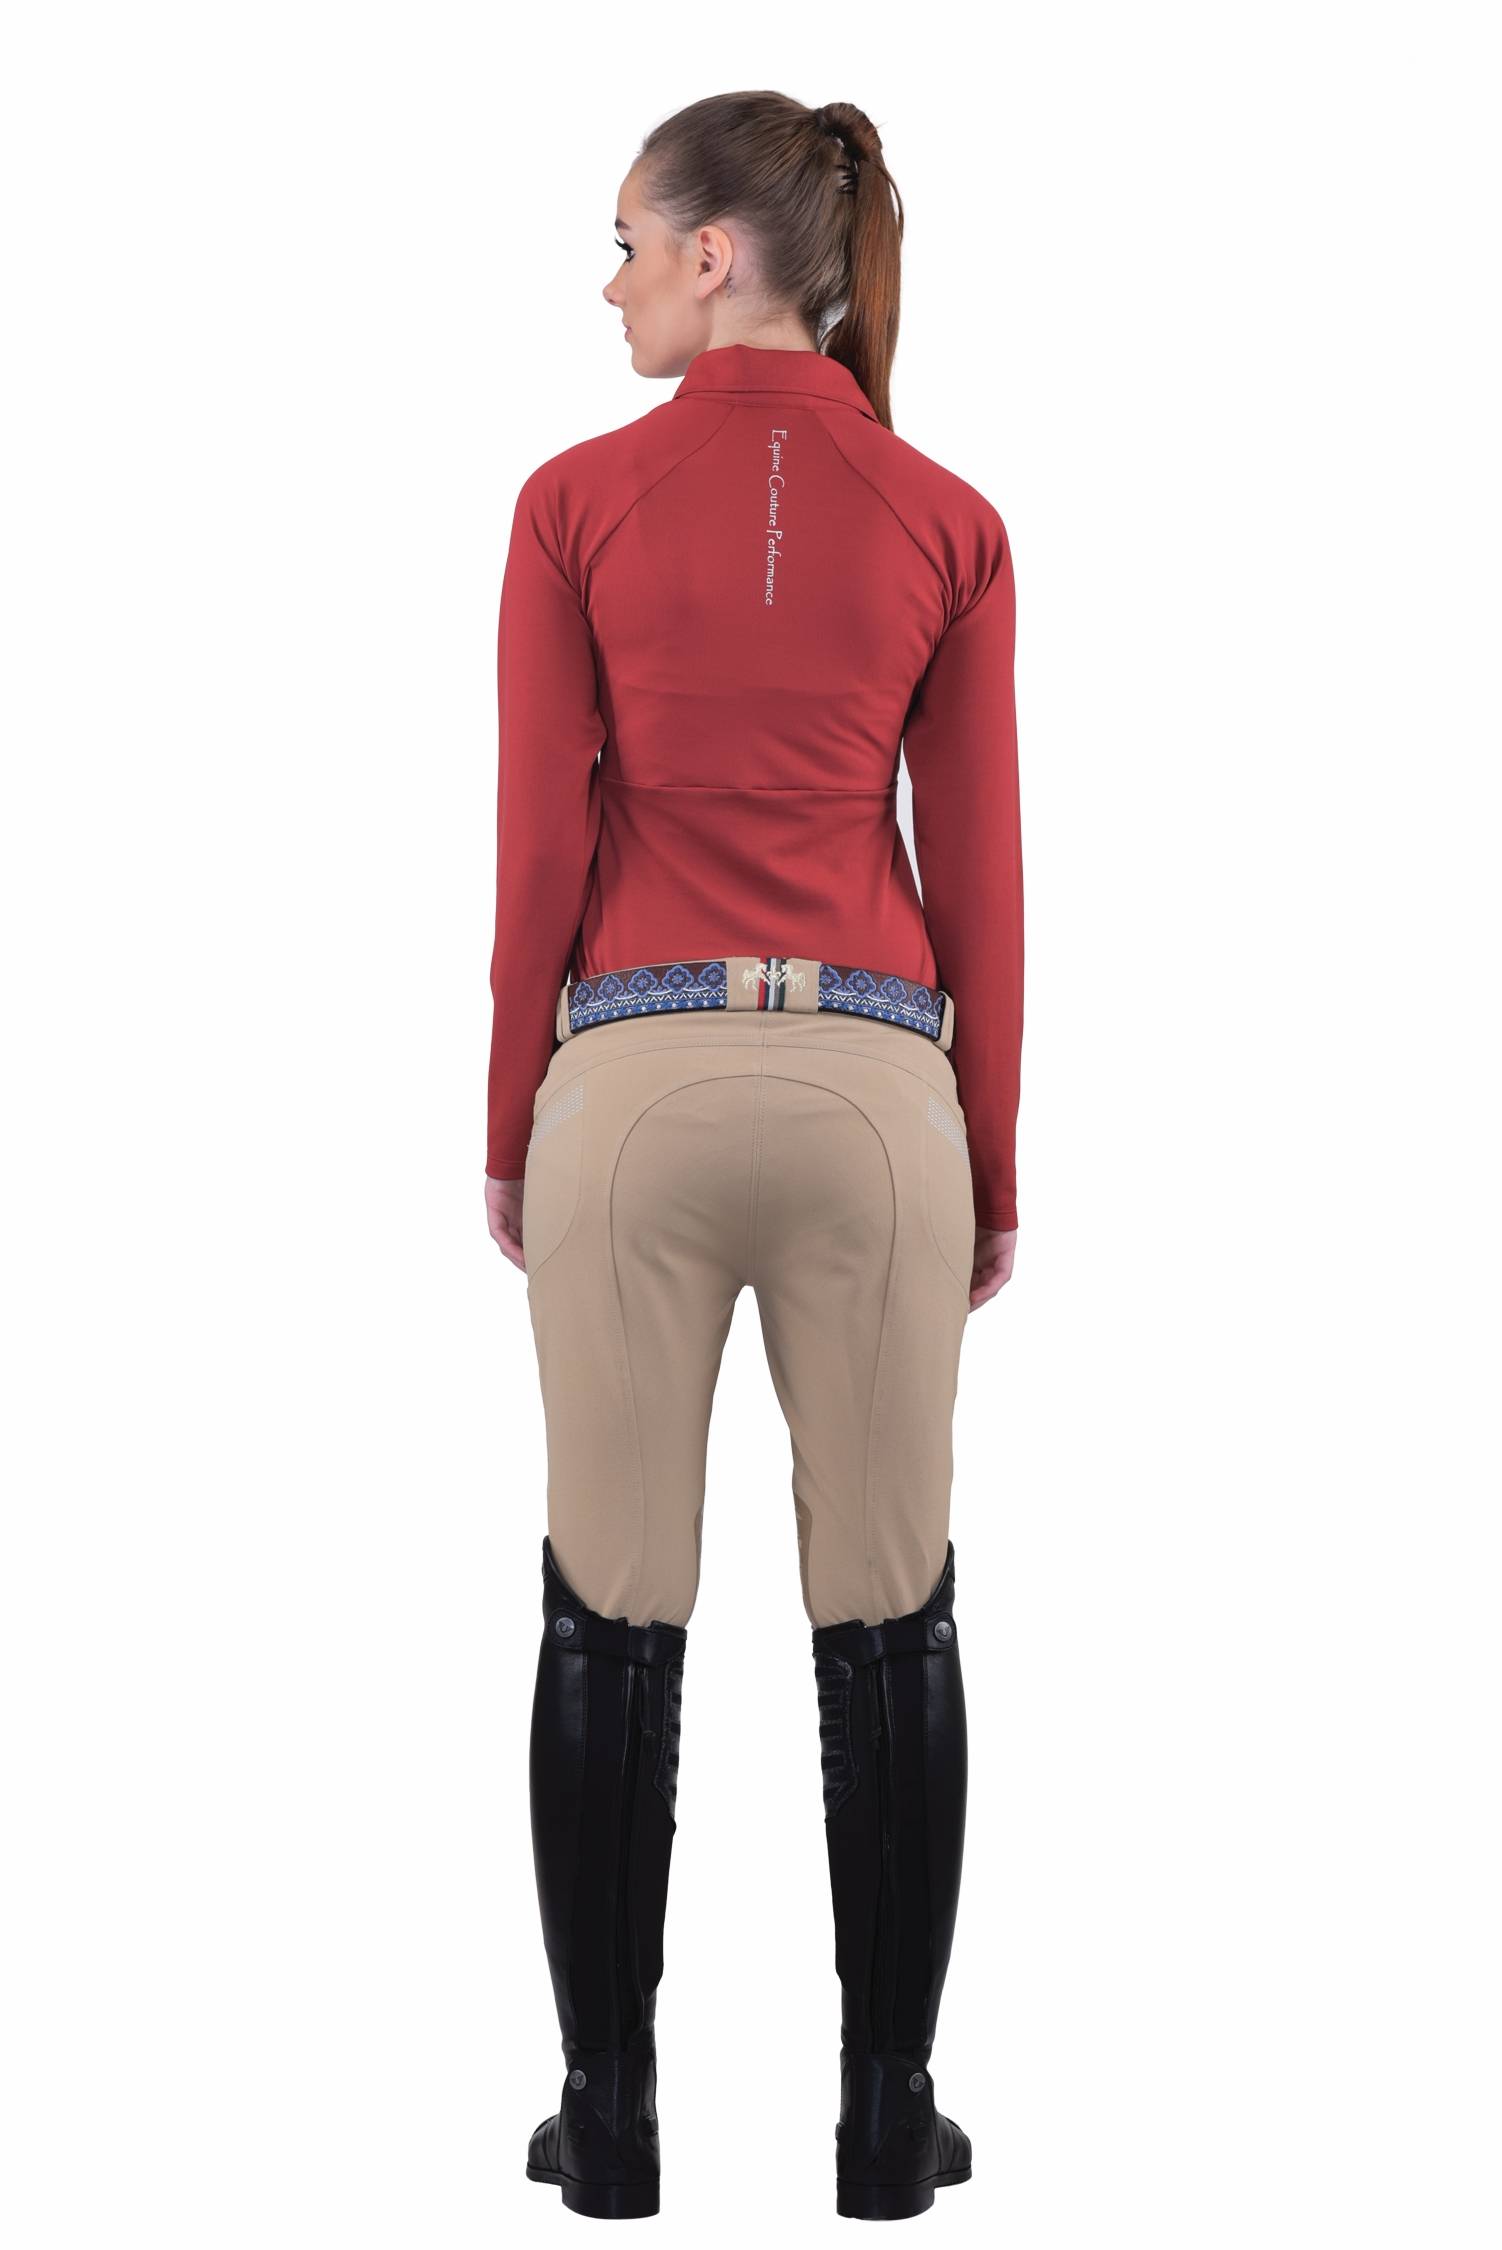 Equine Couture Ladies Sarah Silicone Knee Patch Breeches